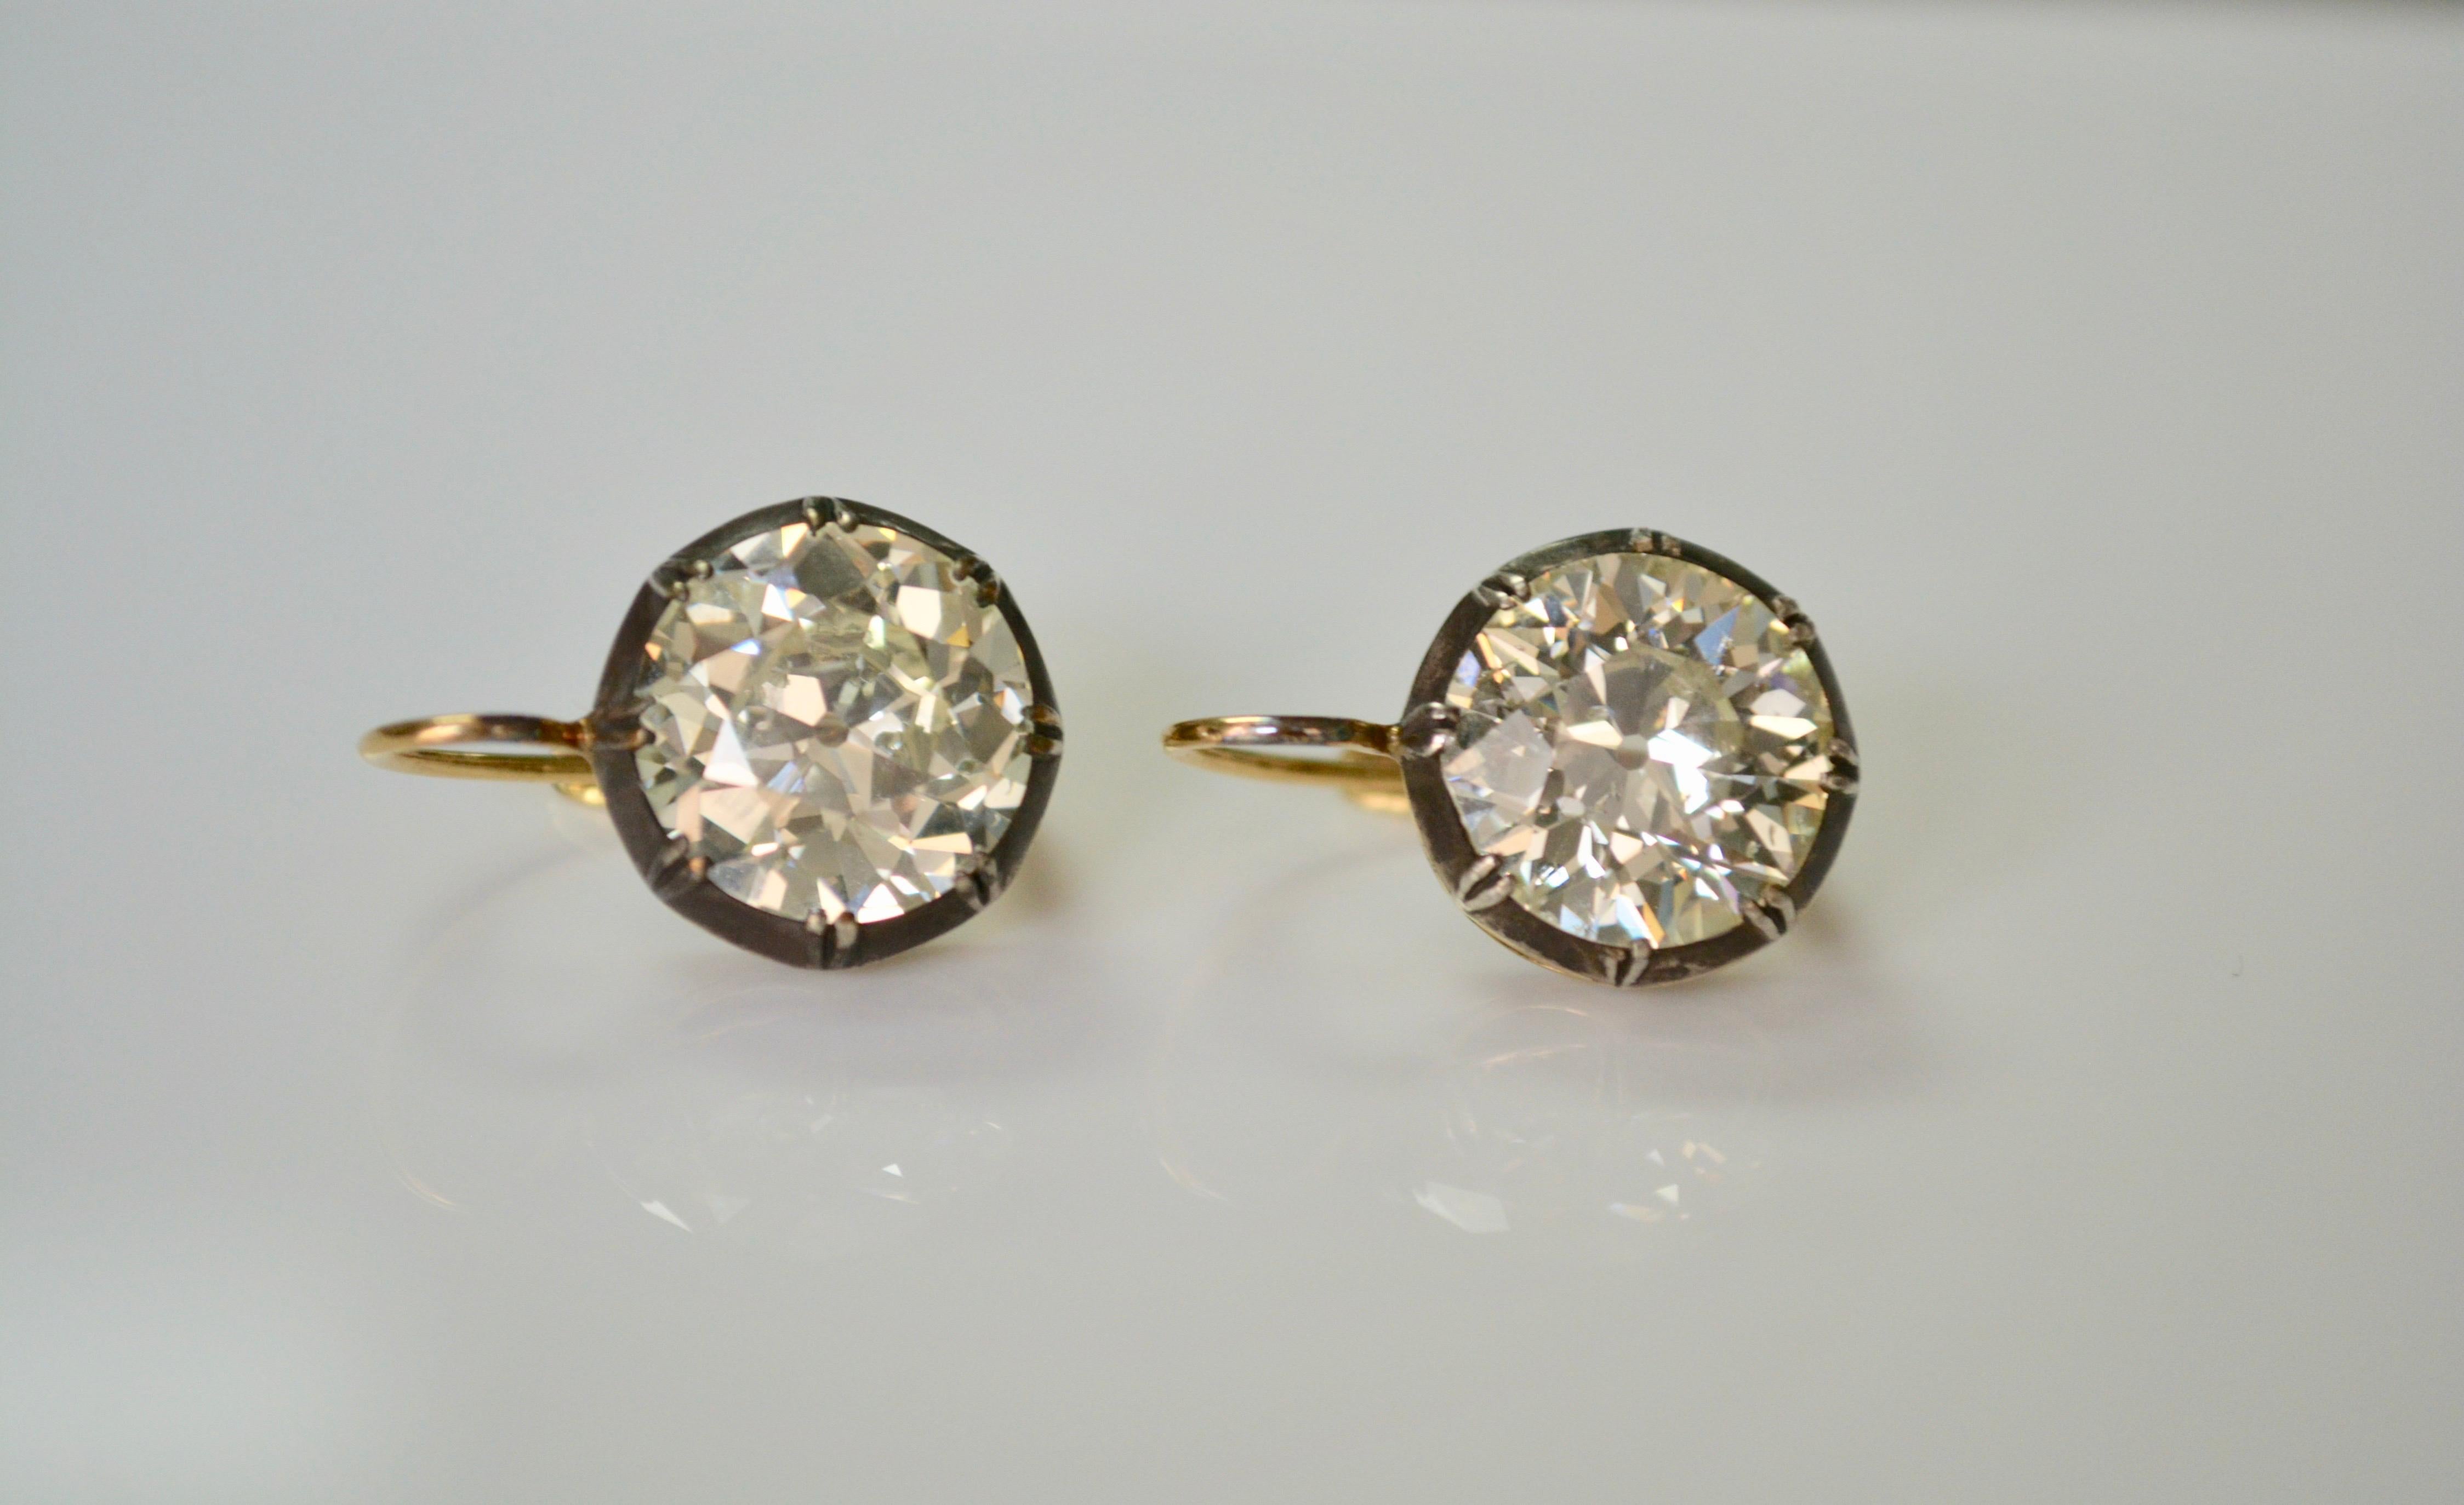 A pair of lovely antique old European cut diamond antique style dangle earrings features two large old European cut diamonds weighing 5.66 carat and 6.01 carat a total of 11.67 carat. The diamonds have L-M color and S I clarity ( eye clean). These